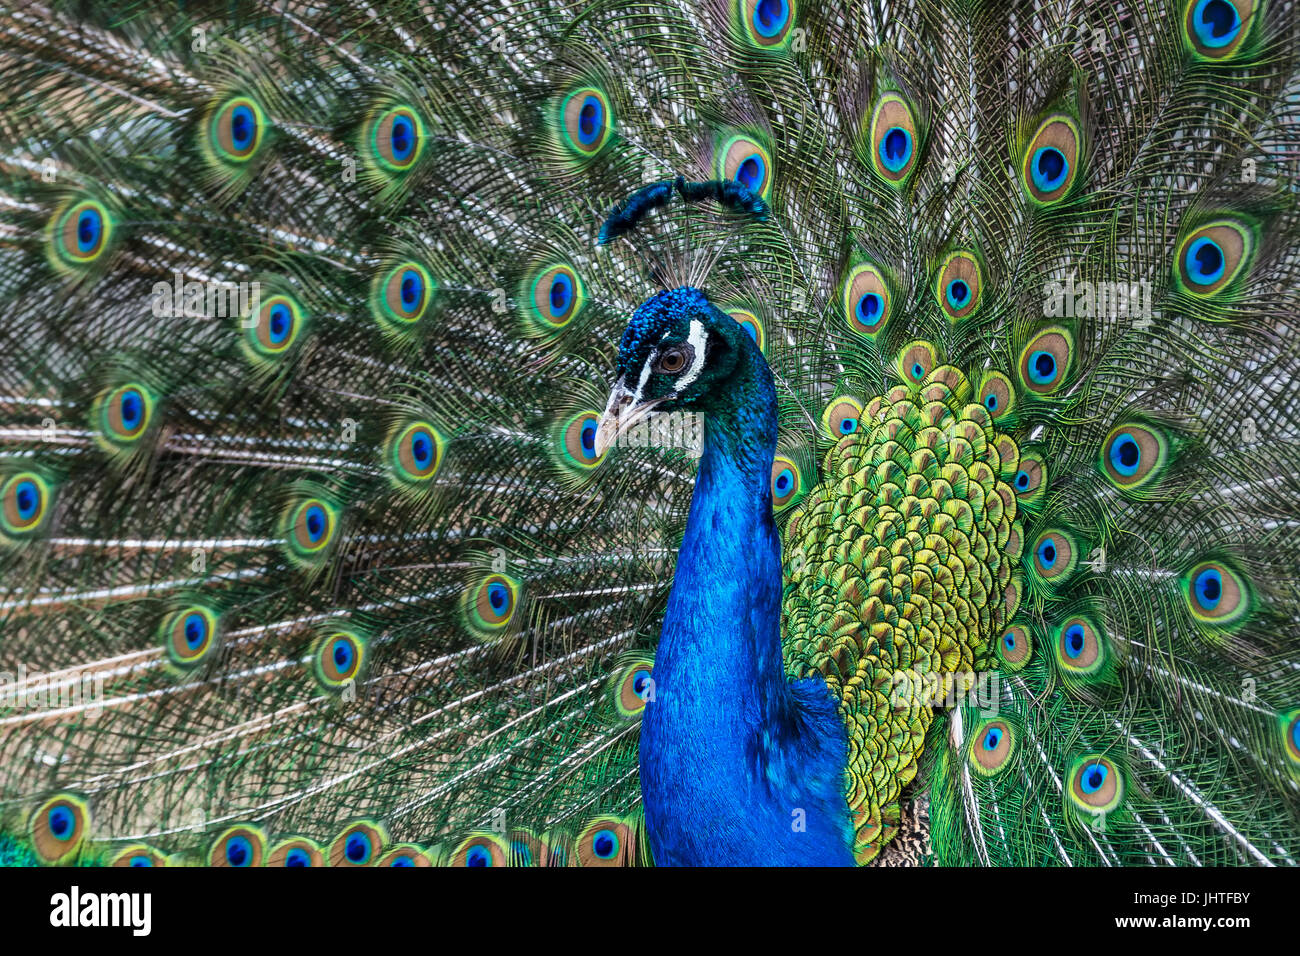 Wild animal world. Peacock with open colorful tail Stock Photo - Alamy